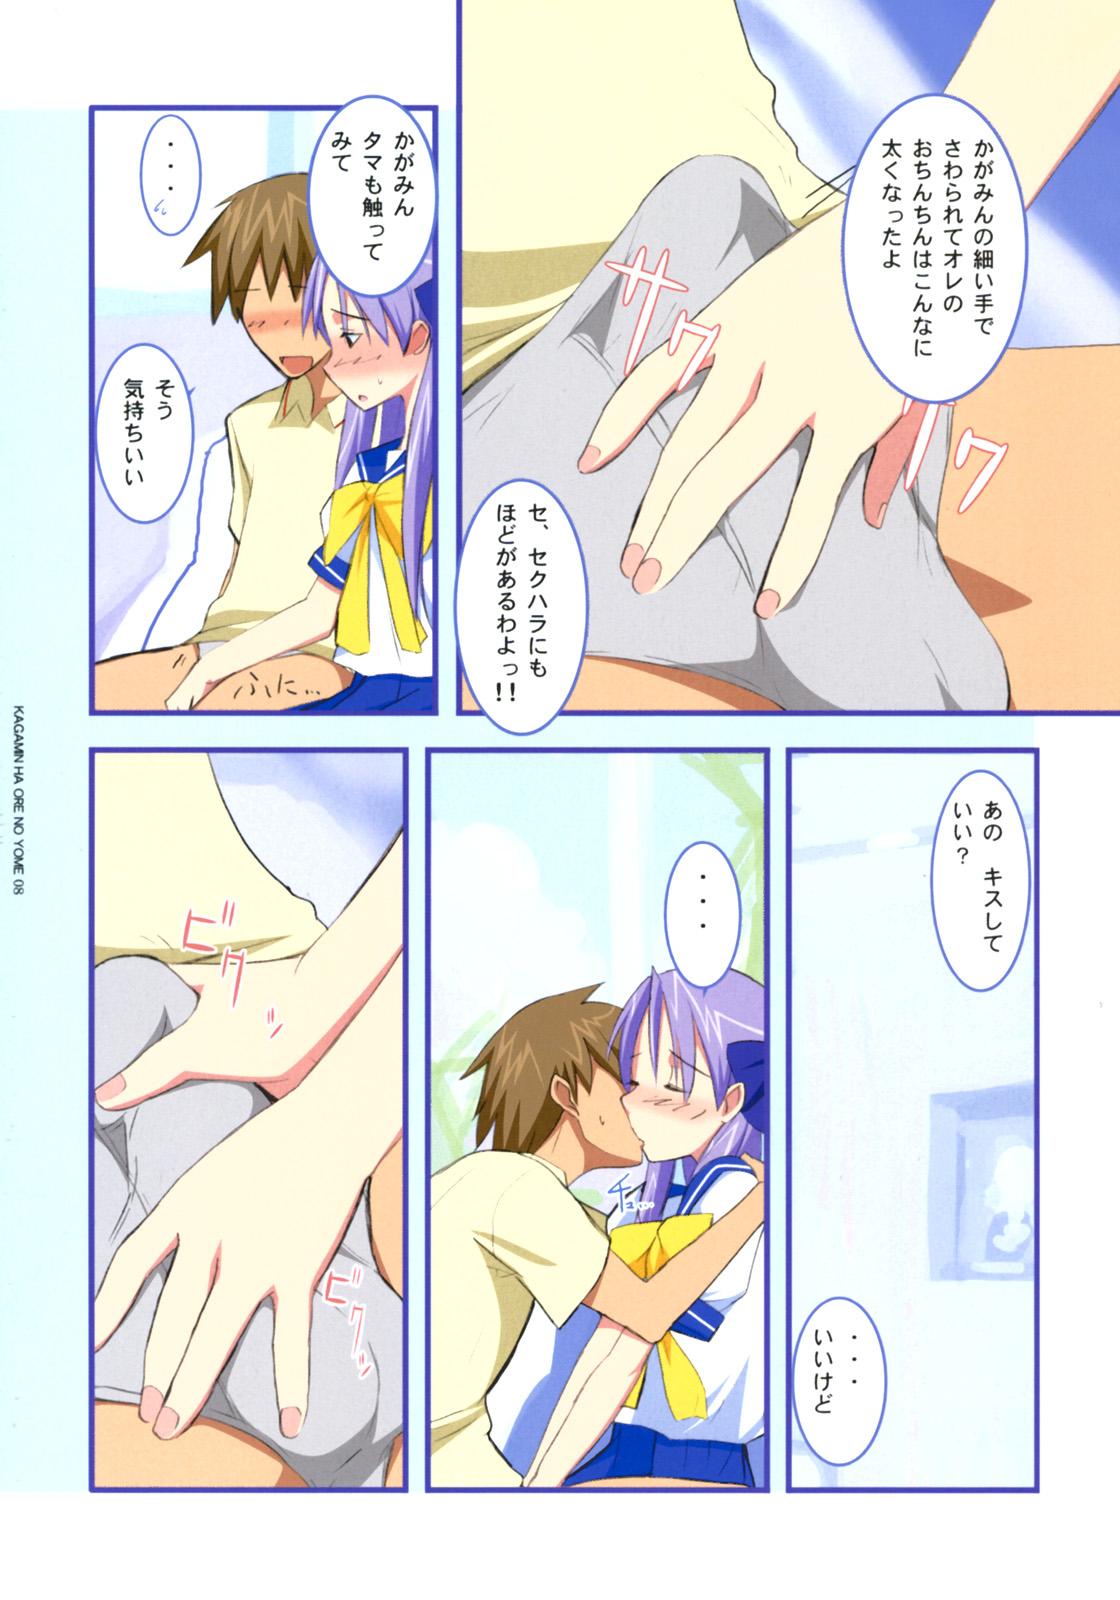 Red Kagamin wa Ore no Yome - Lucky star Sexcam - Page 9